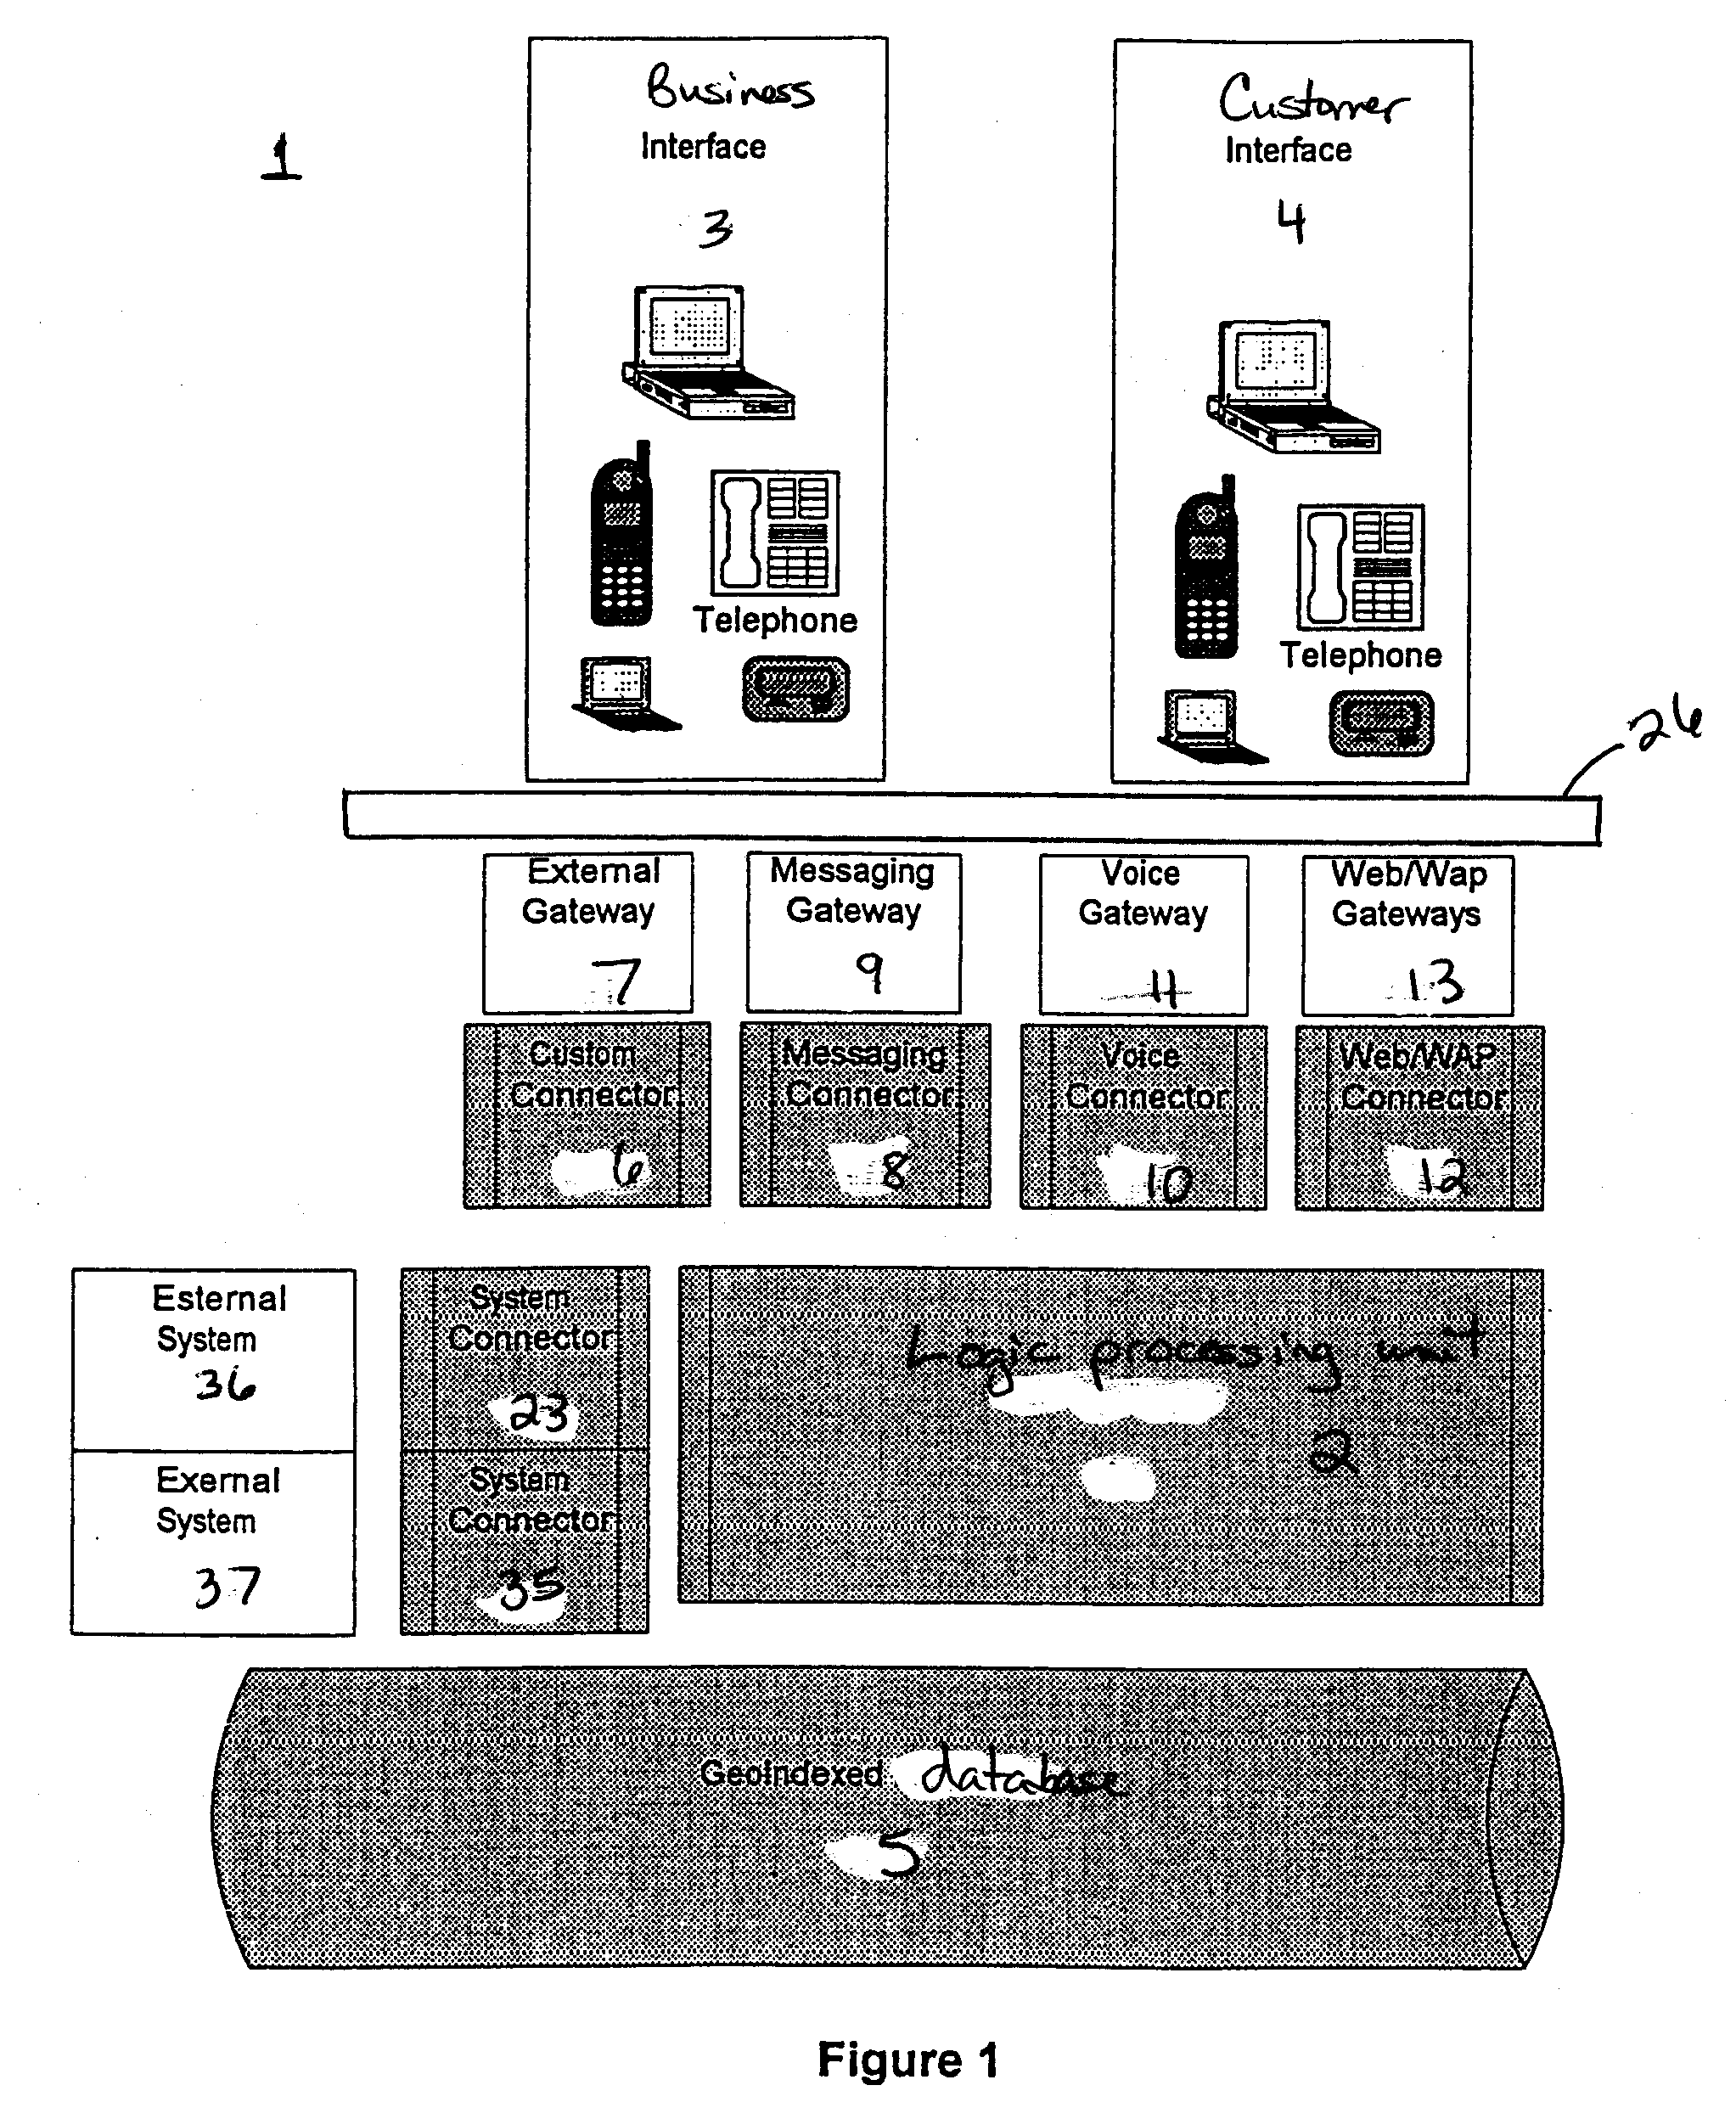 Method and system of providing location sensitive business information to customers